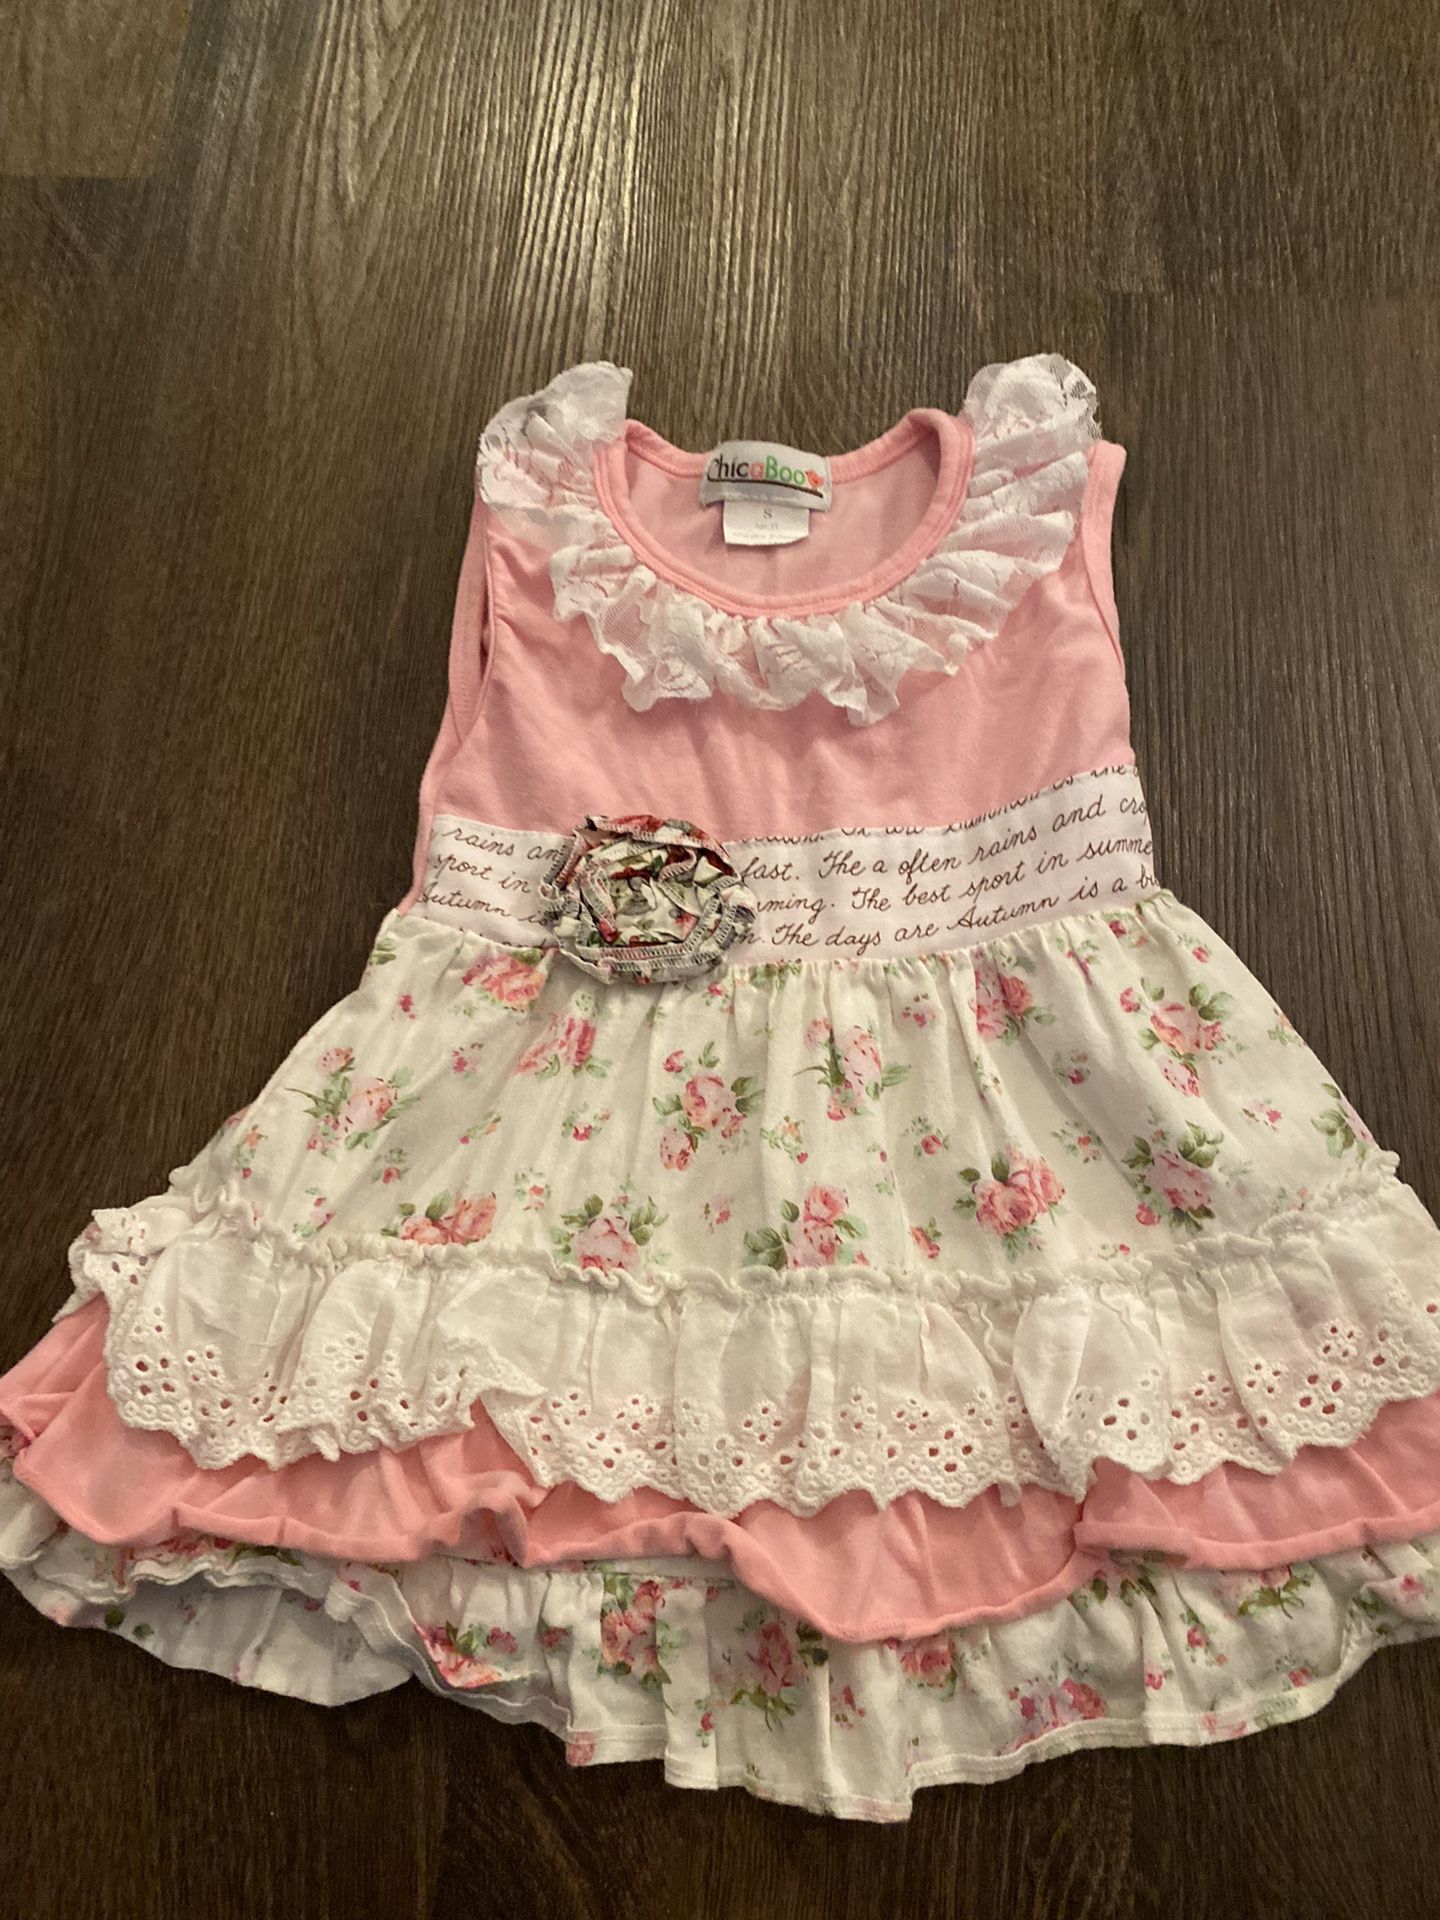 Girls Pink Lace Chicaboo Dress Size 2t #17